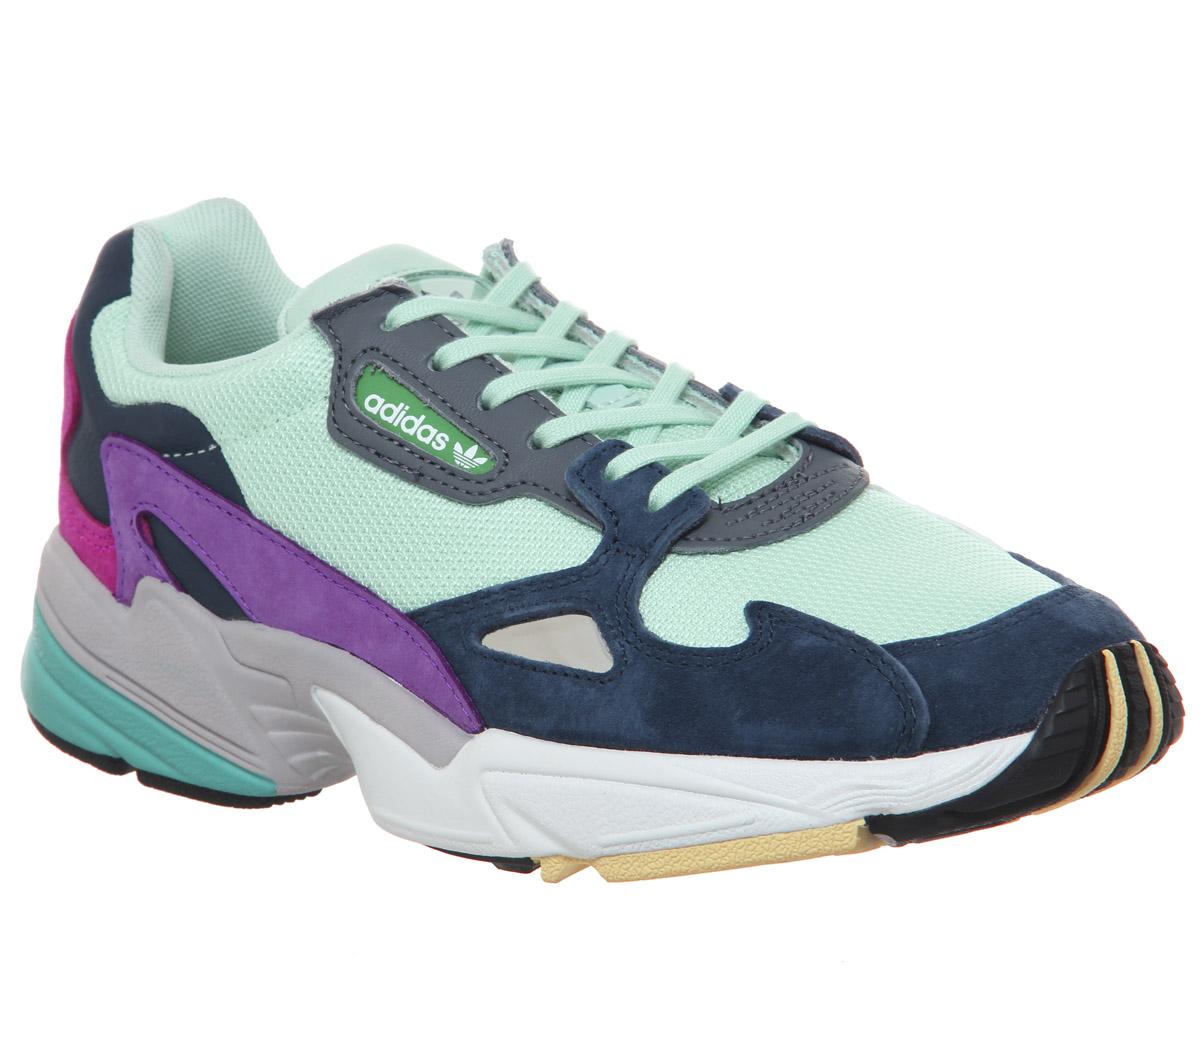 adidas Falcon Trainers Clear Mint Collegiate Navy - Hers trainers